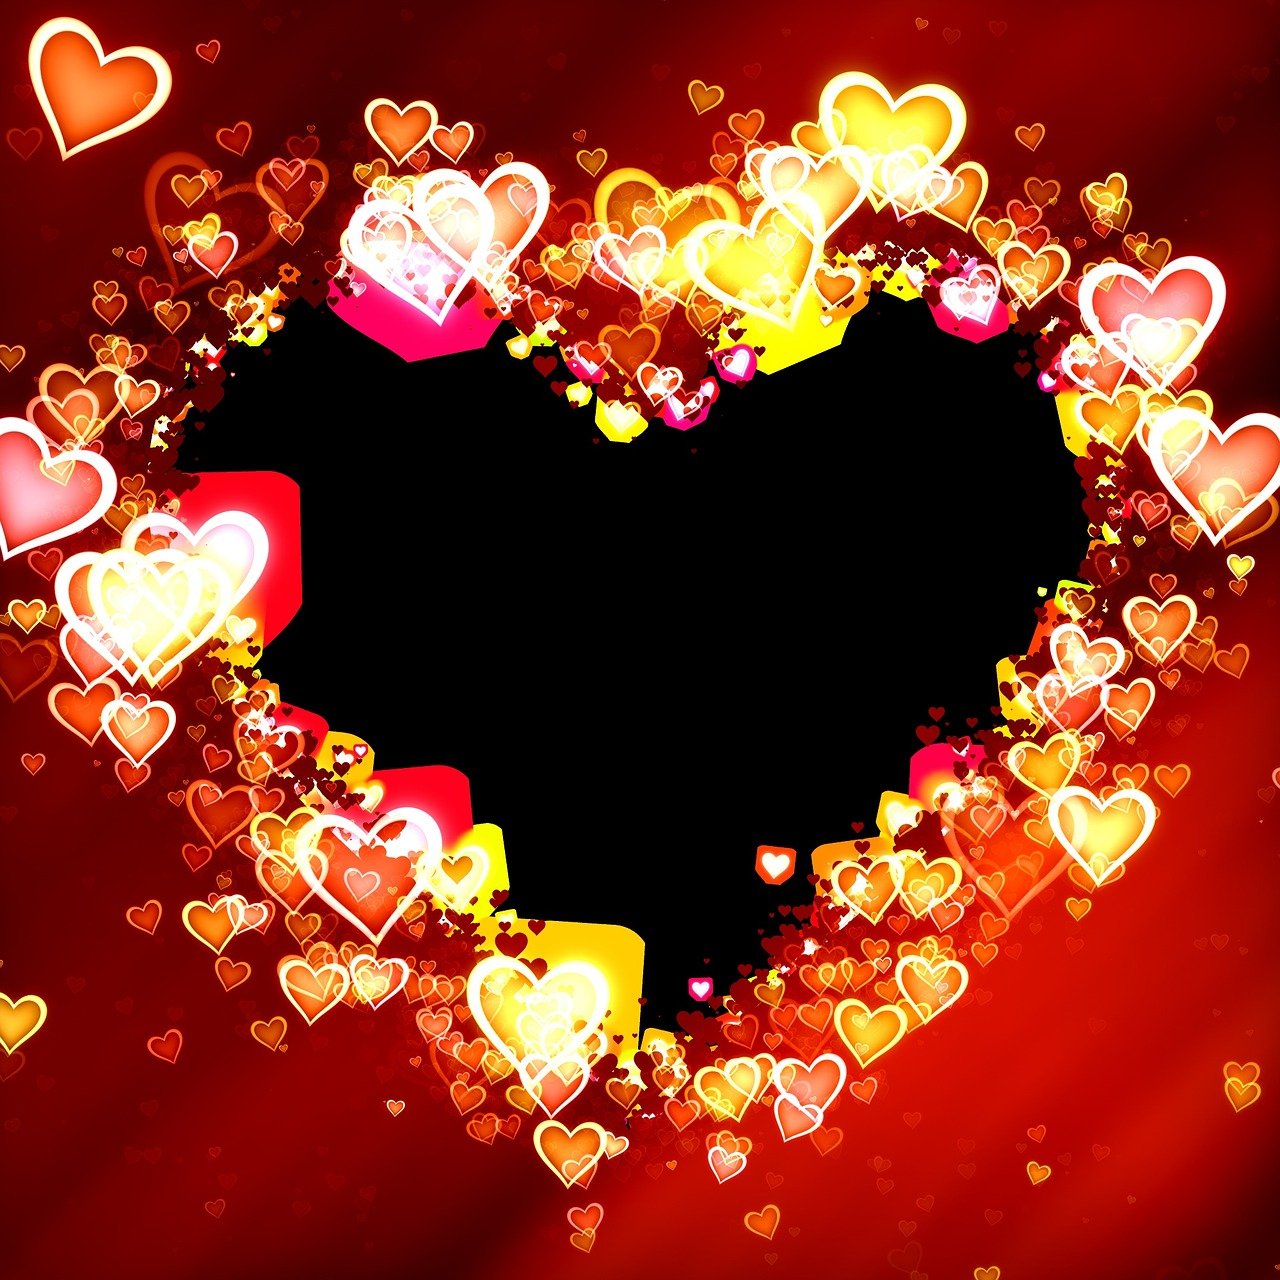 a heart made out of many hearts on a red background, a picture, yellows and reddish black, shining lights, swirling around, with a black background